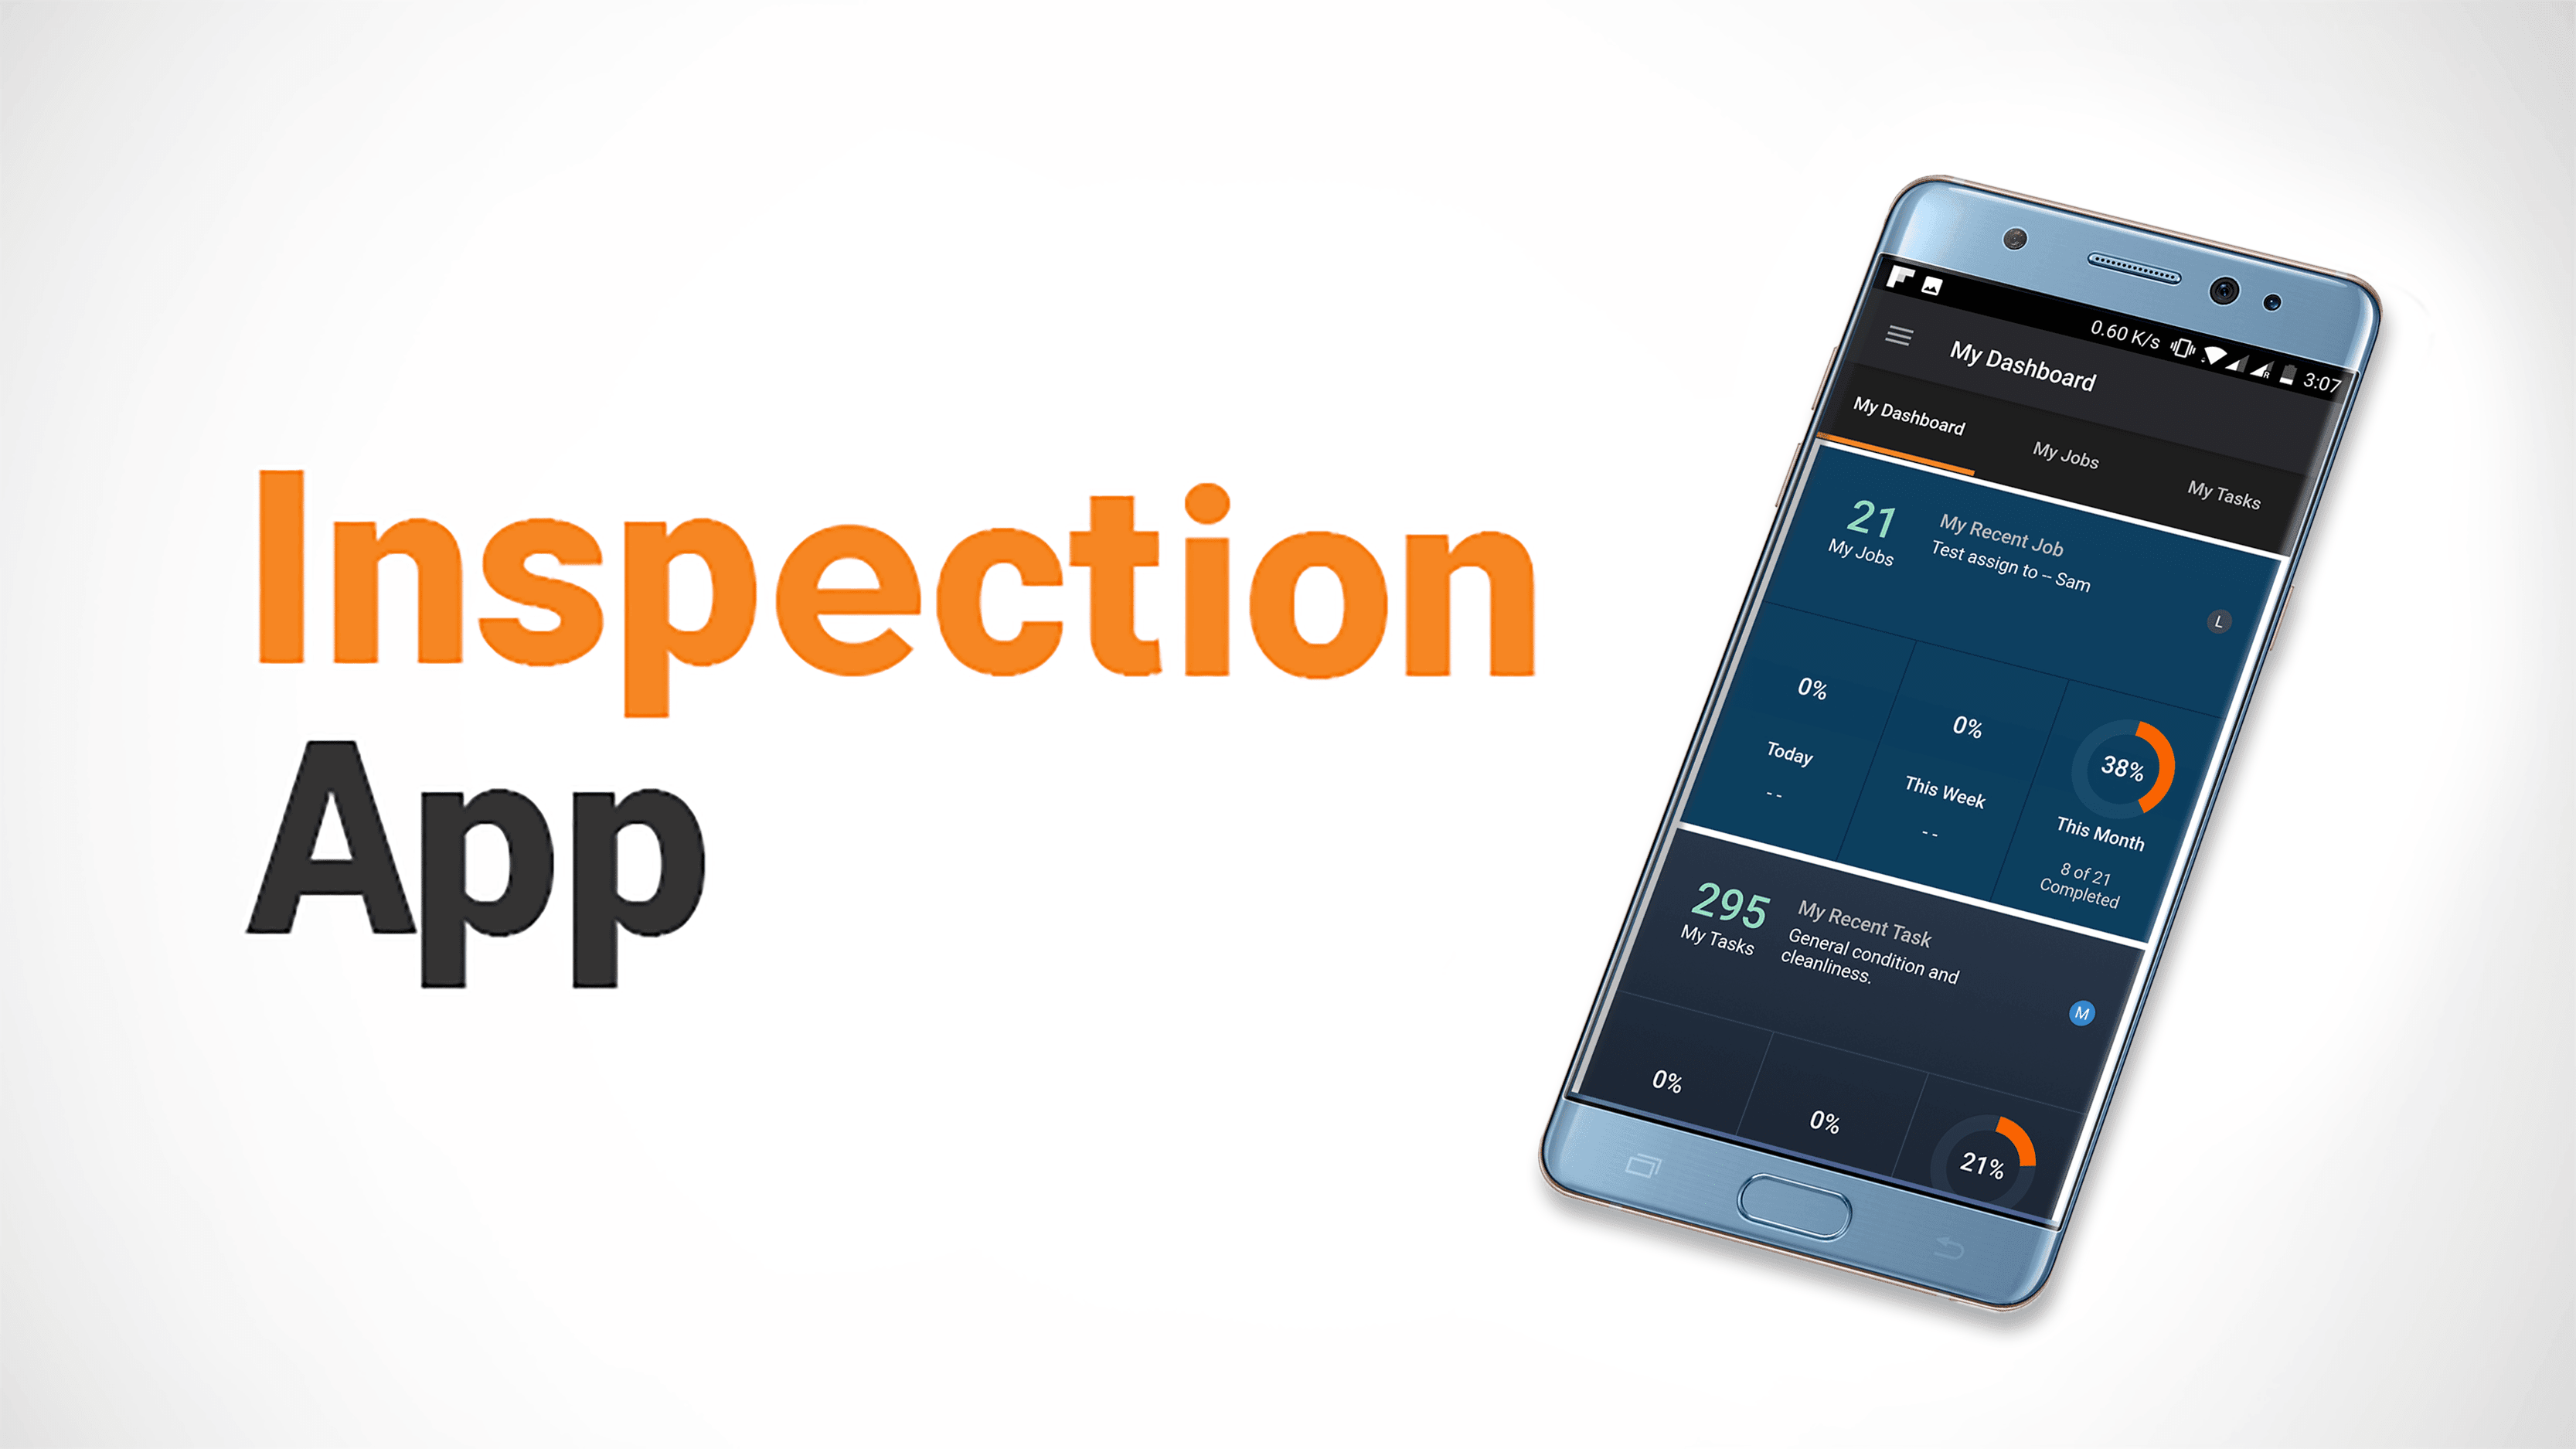 Point of Rental's Inspection App won a 2017 ALH Award.